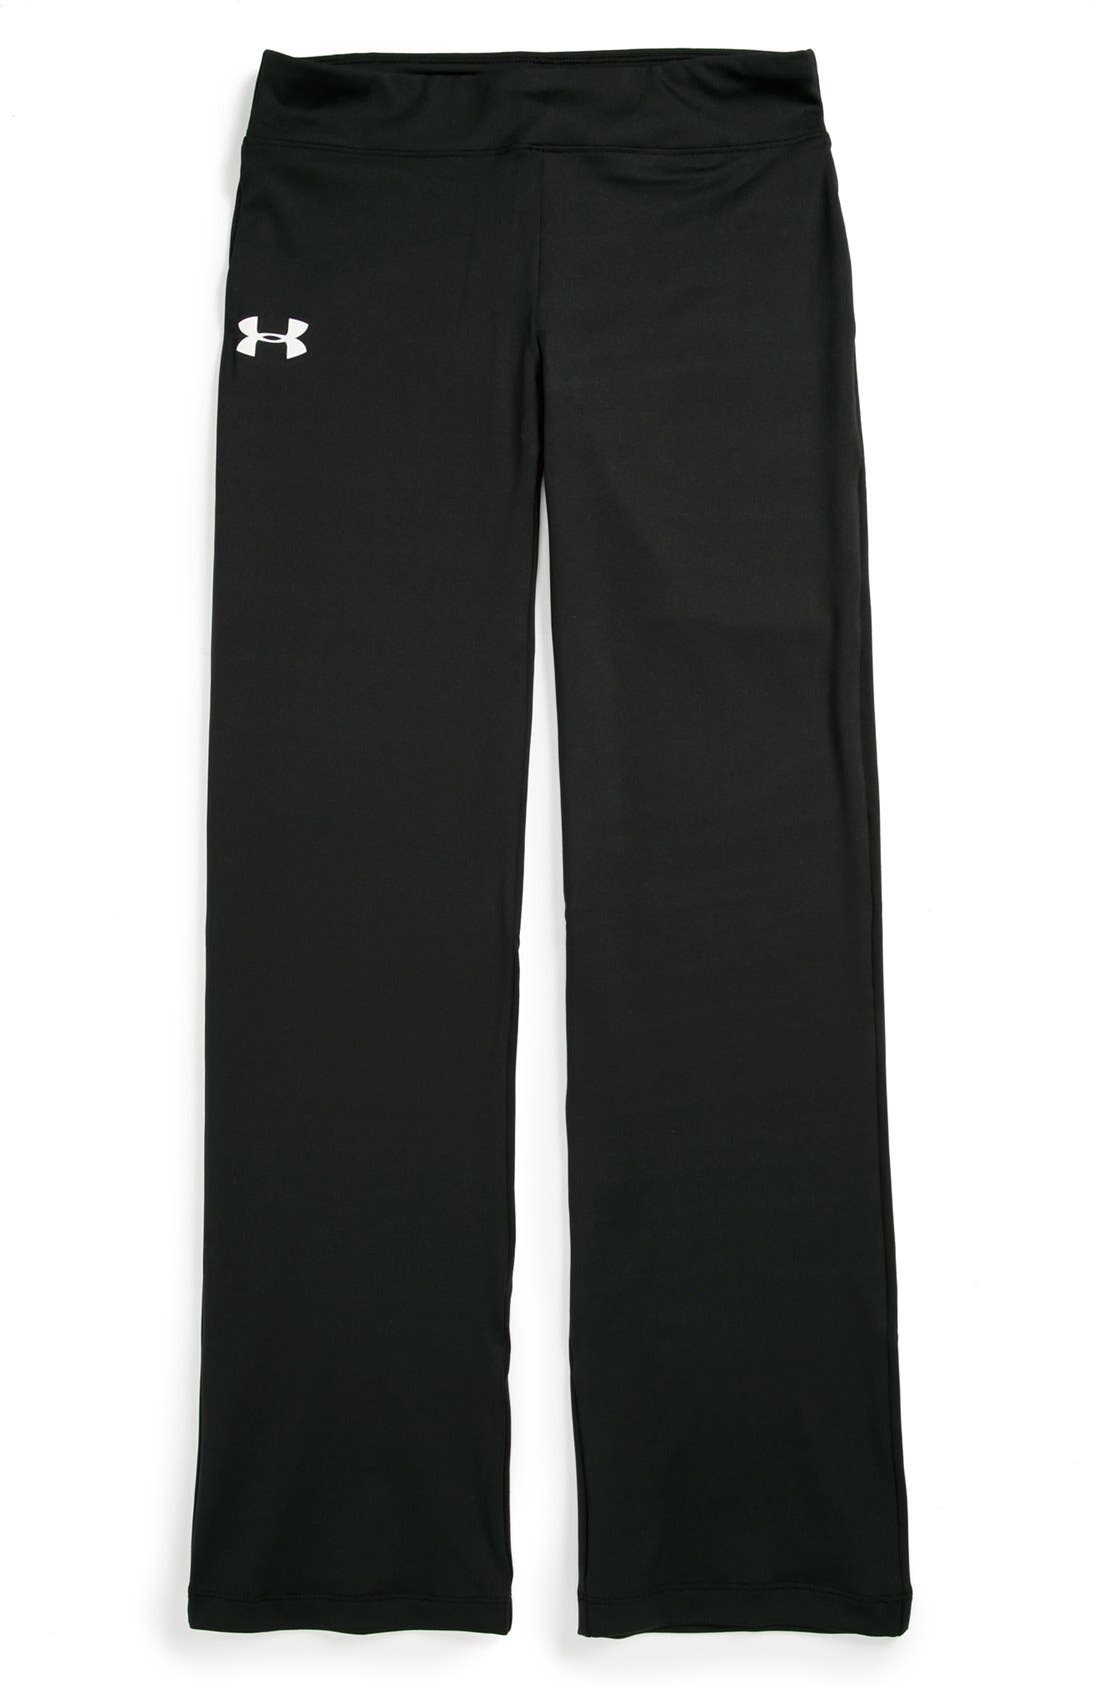 under armour fitted heat gear pants